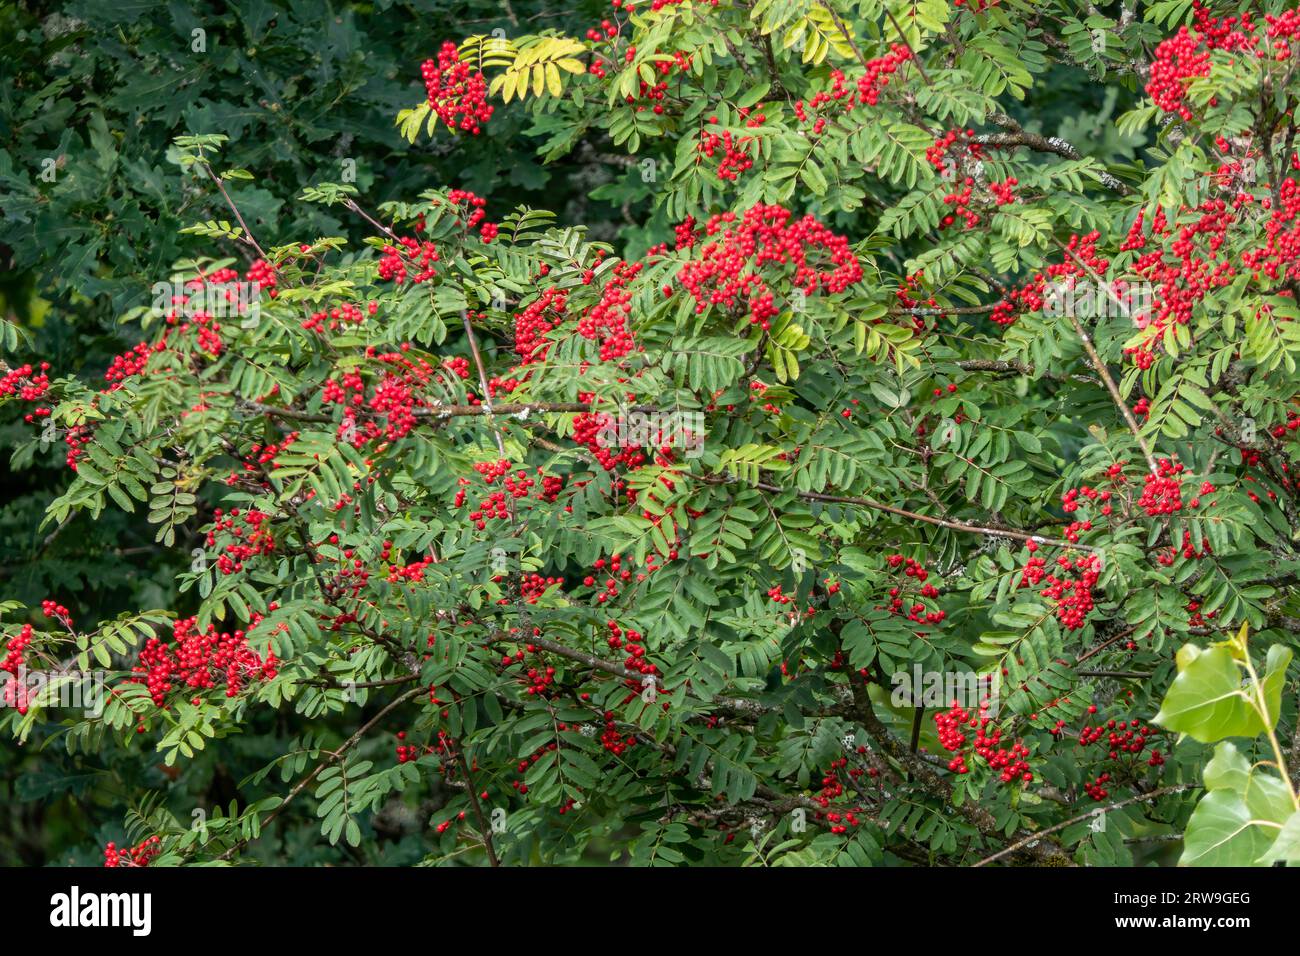 Stunning close-up of red ripe rowan berries among green leaves. Vibrant red berries against the backdrop of the leaves. Natural light, highlighting th Stock Photo